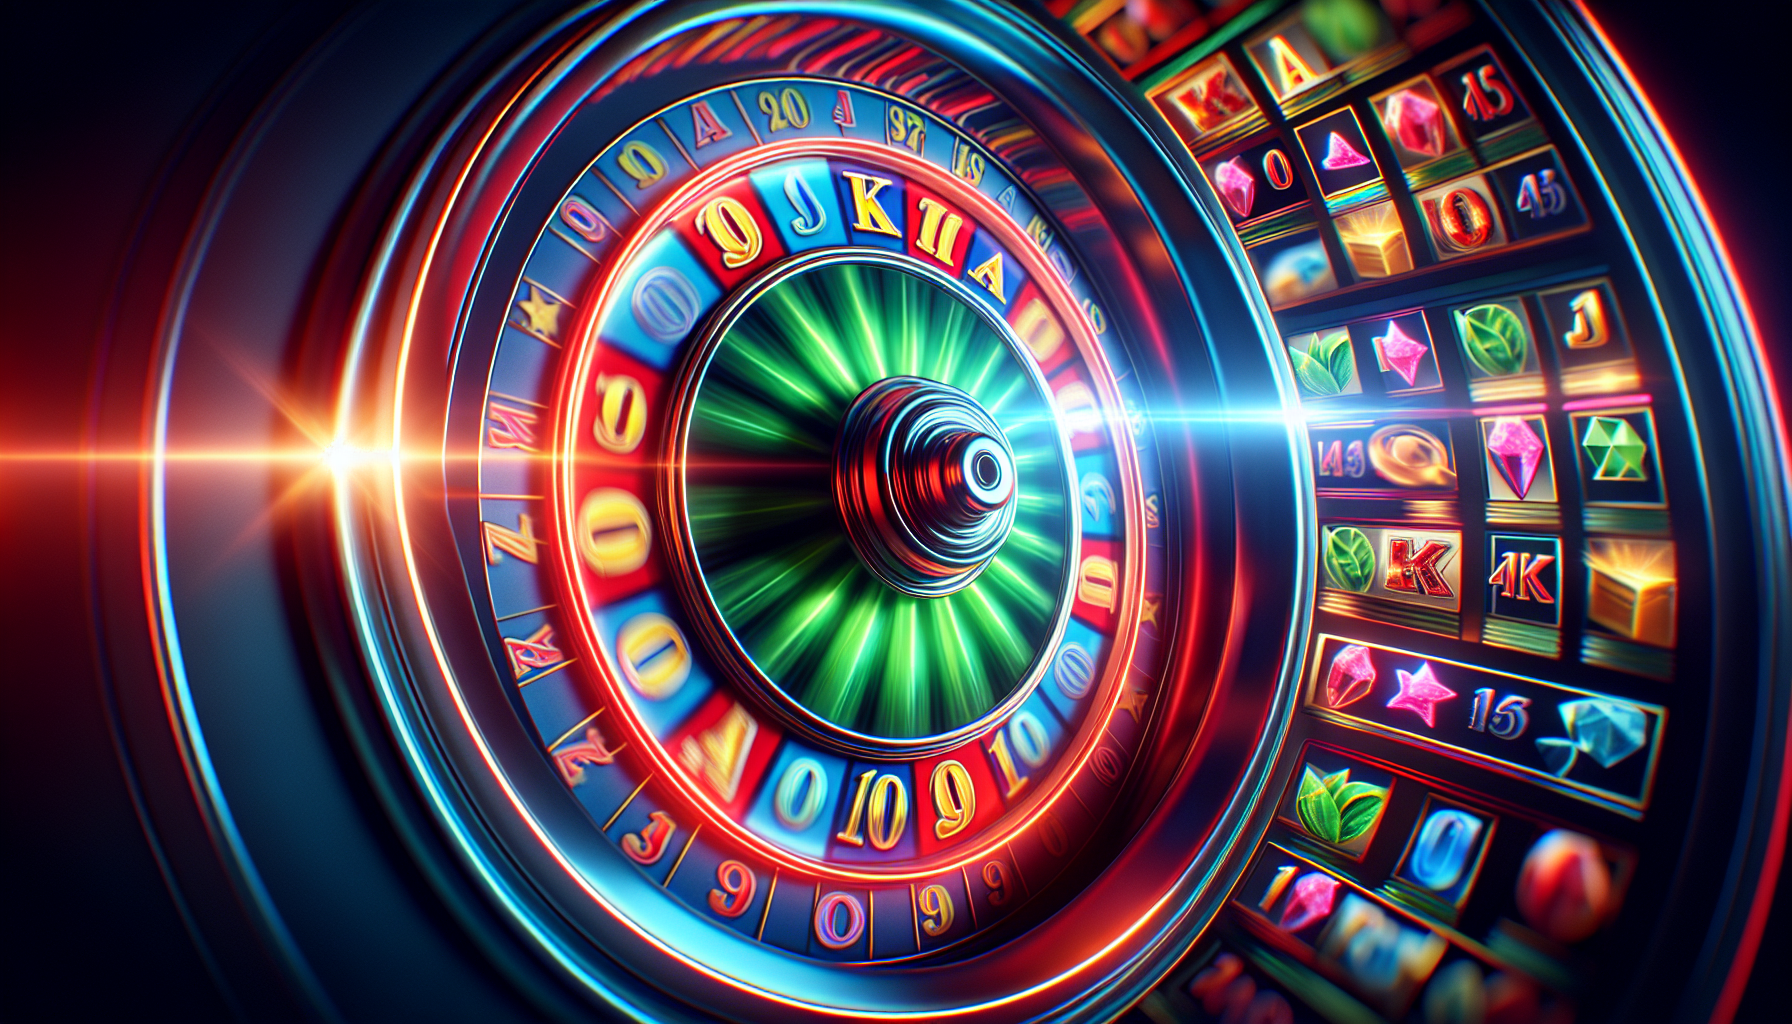 What Is The Best Chance Of Winning On Online Slots?